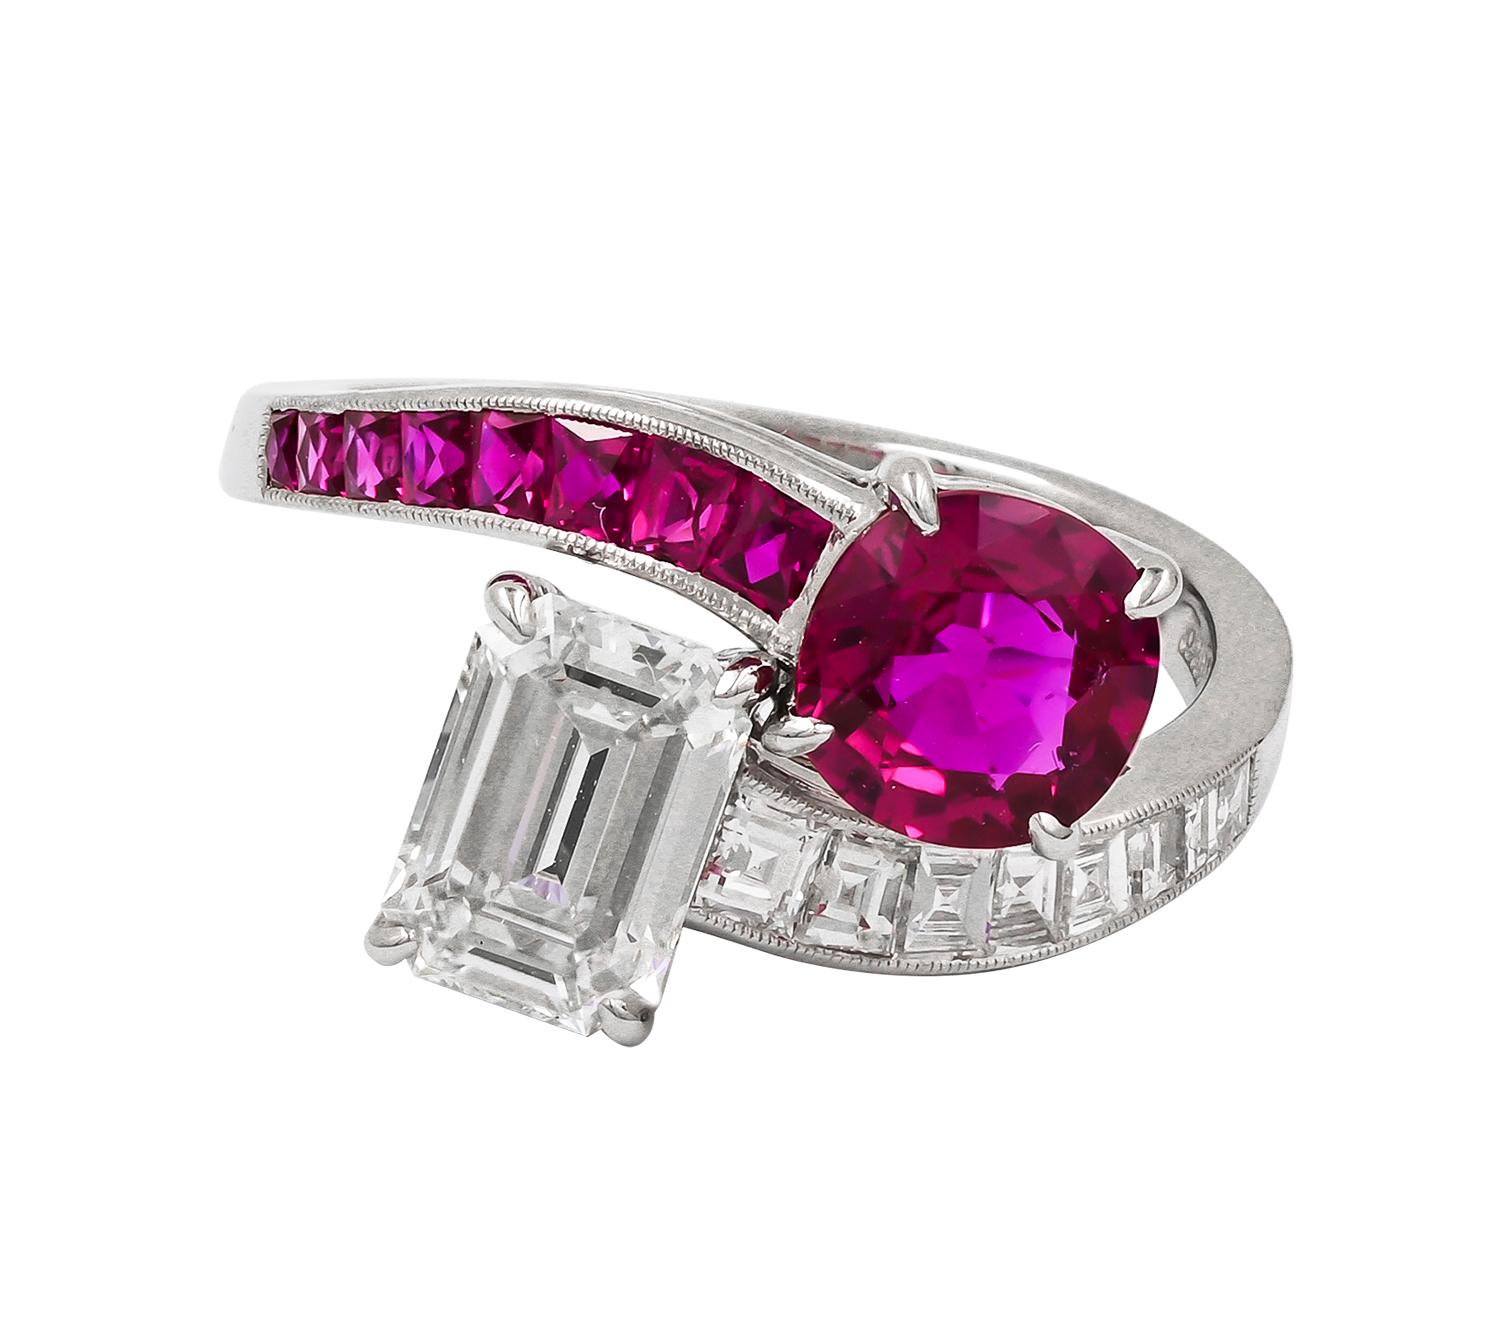 Sophia D platinum ring is composed of Ruby and Diamond. The featured ruby is 1.08 carats and the diamond is 1.08 carats. The surrounding rubies weight totals .25 carats and the diamonds weight totals .28 carat. Ring size is 6 and available for